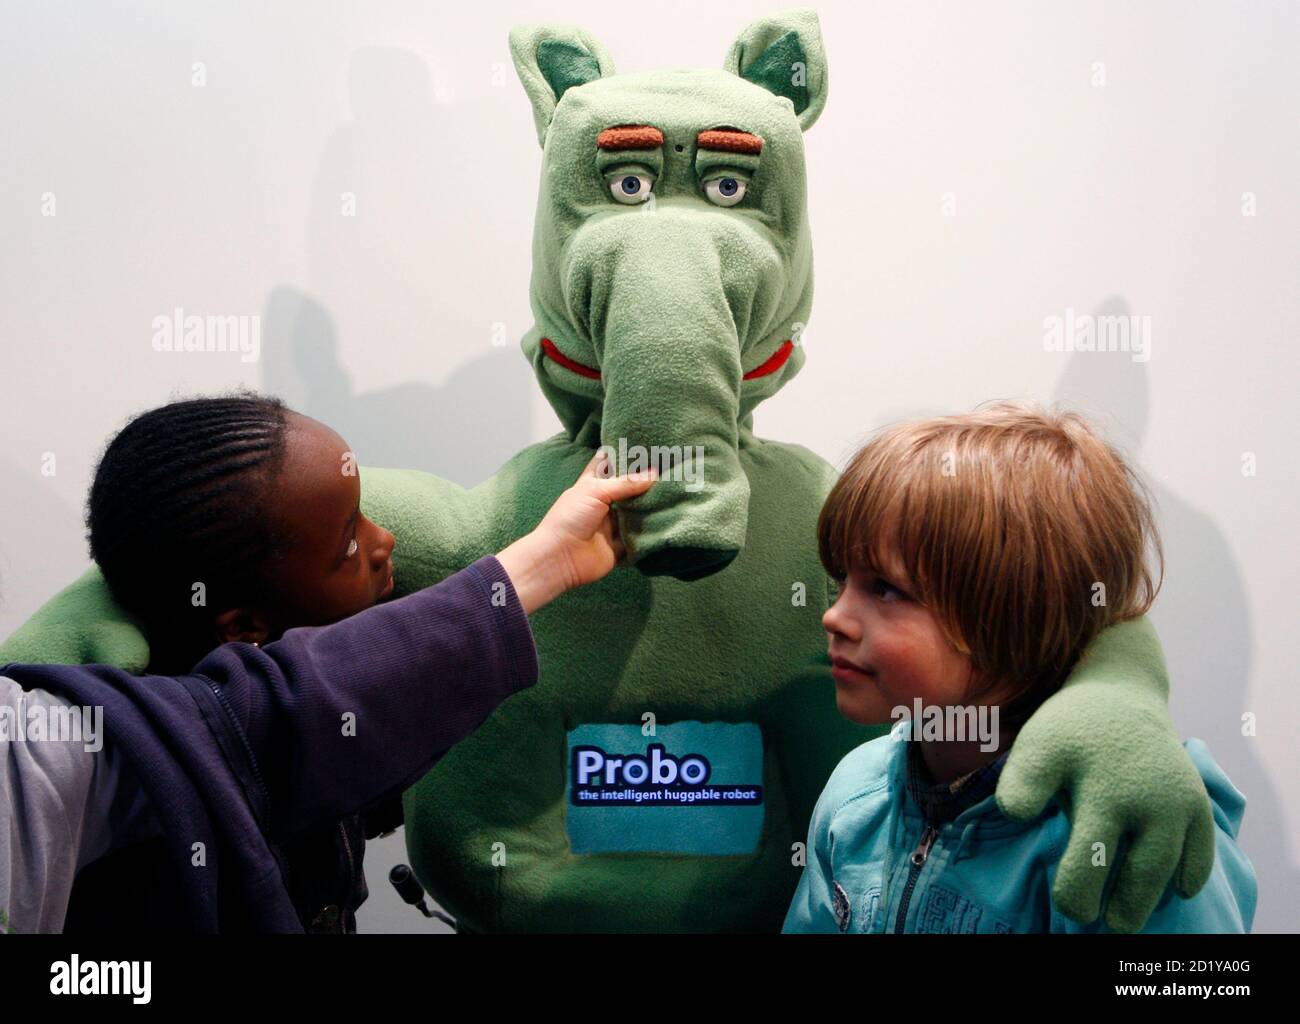 Children pose with Probo, the "intelligent huggable" robot, at the  unveiling of the first prototype in Brussels, April 21, 2009. Probo was  designed to interact with humans and will assist in providing